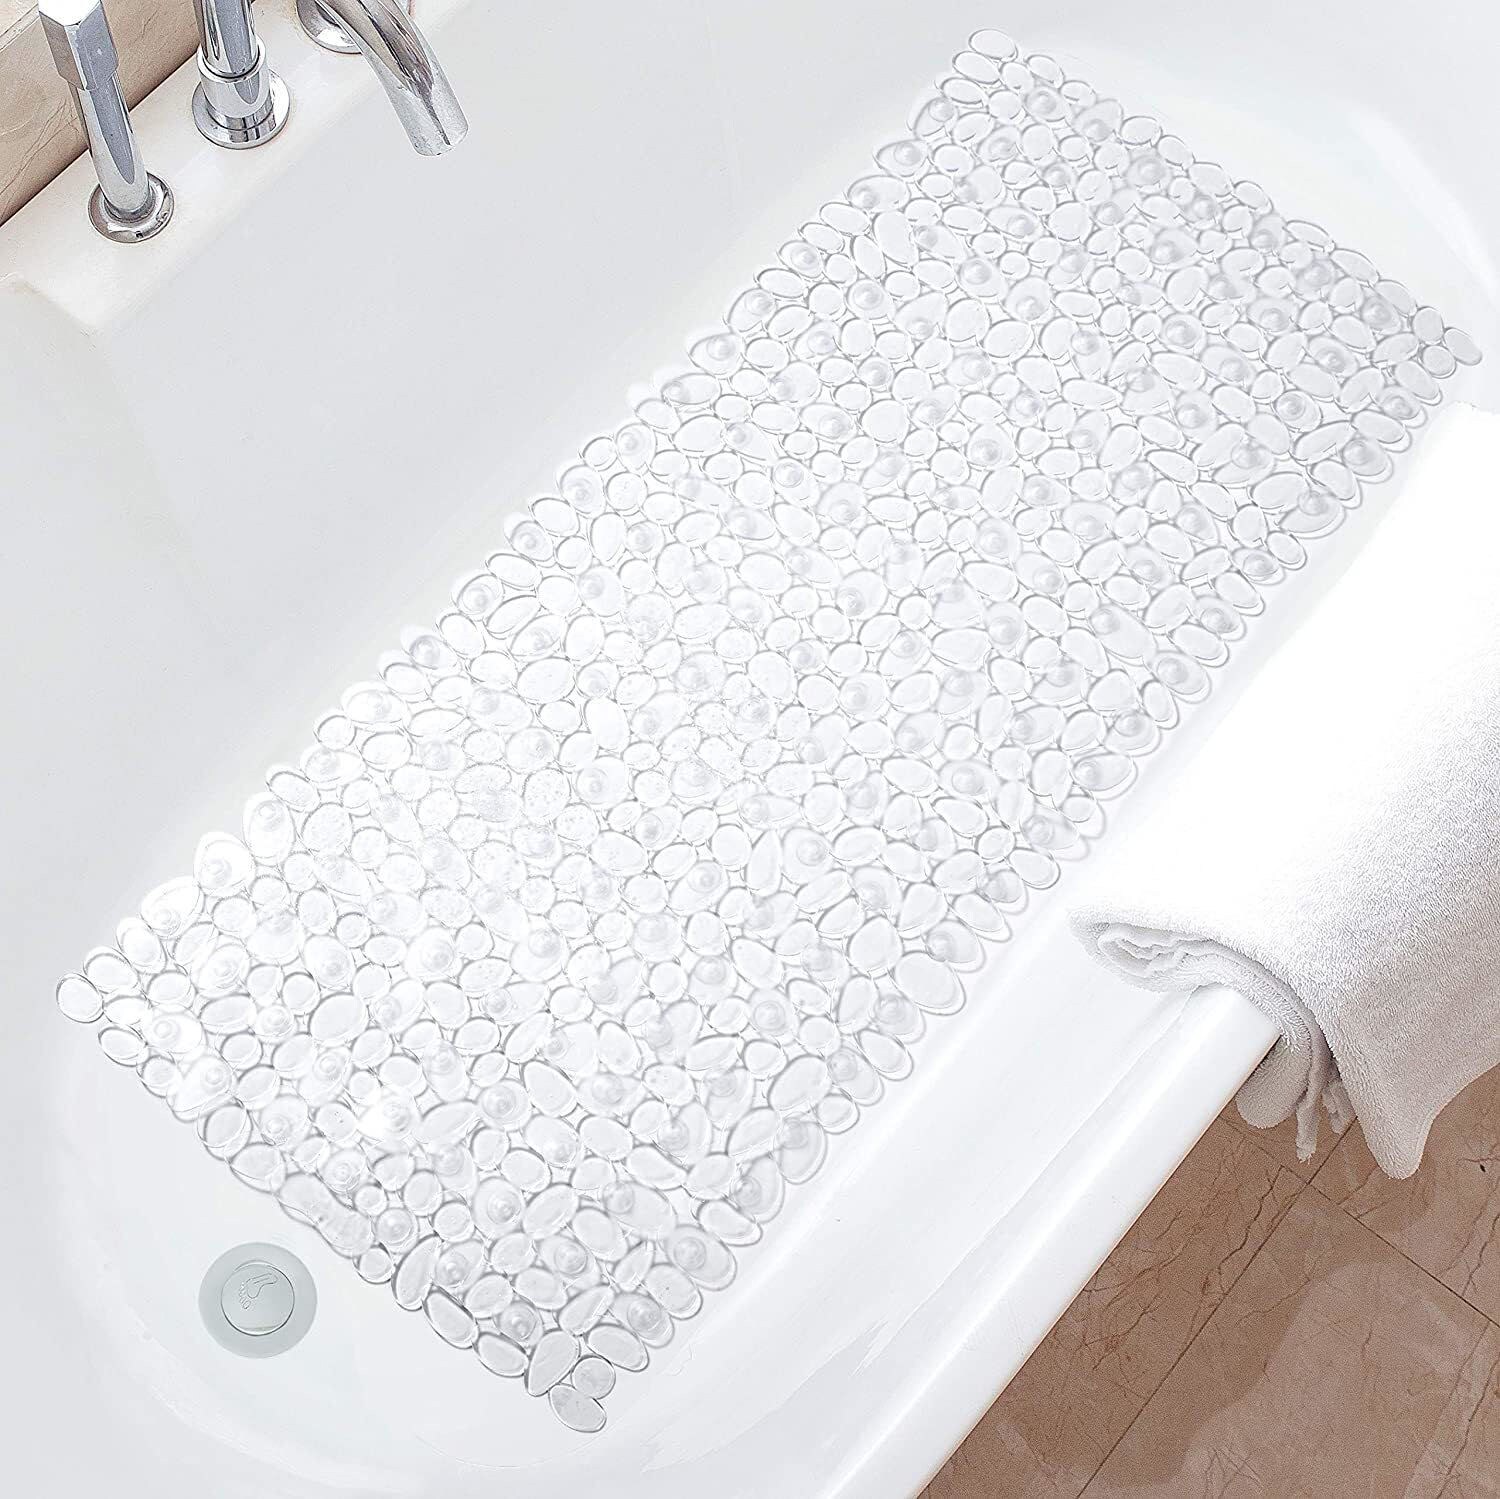 https://assets.dragonmart.ae//pictures/0767820_mumoo-bear-non-slip-pvc-pebbles-bathroom-mat-with-suction-cups-transparent.jpeg